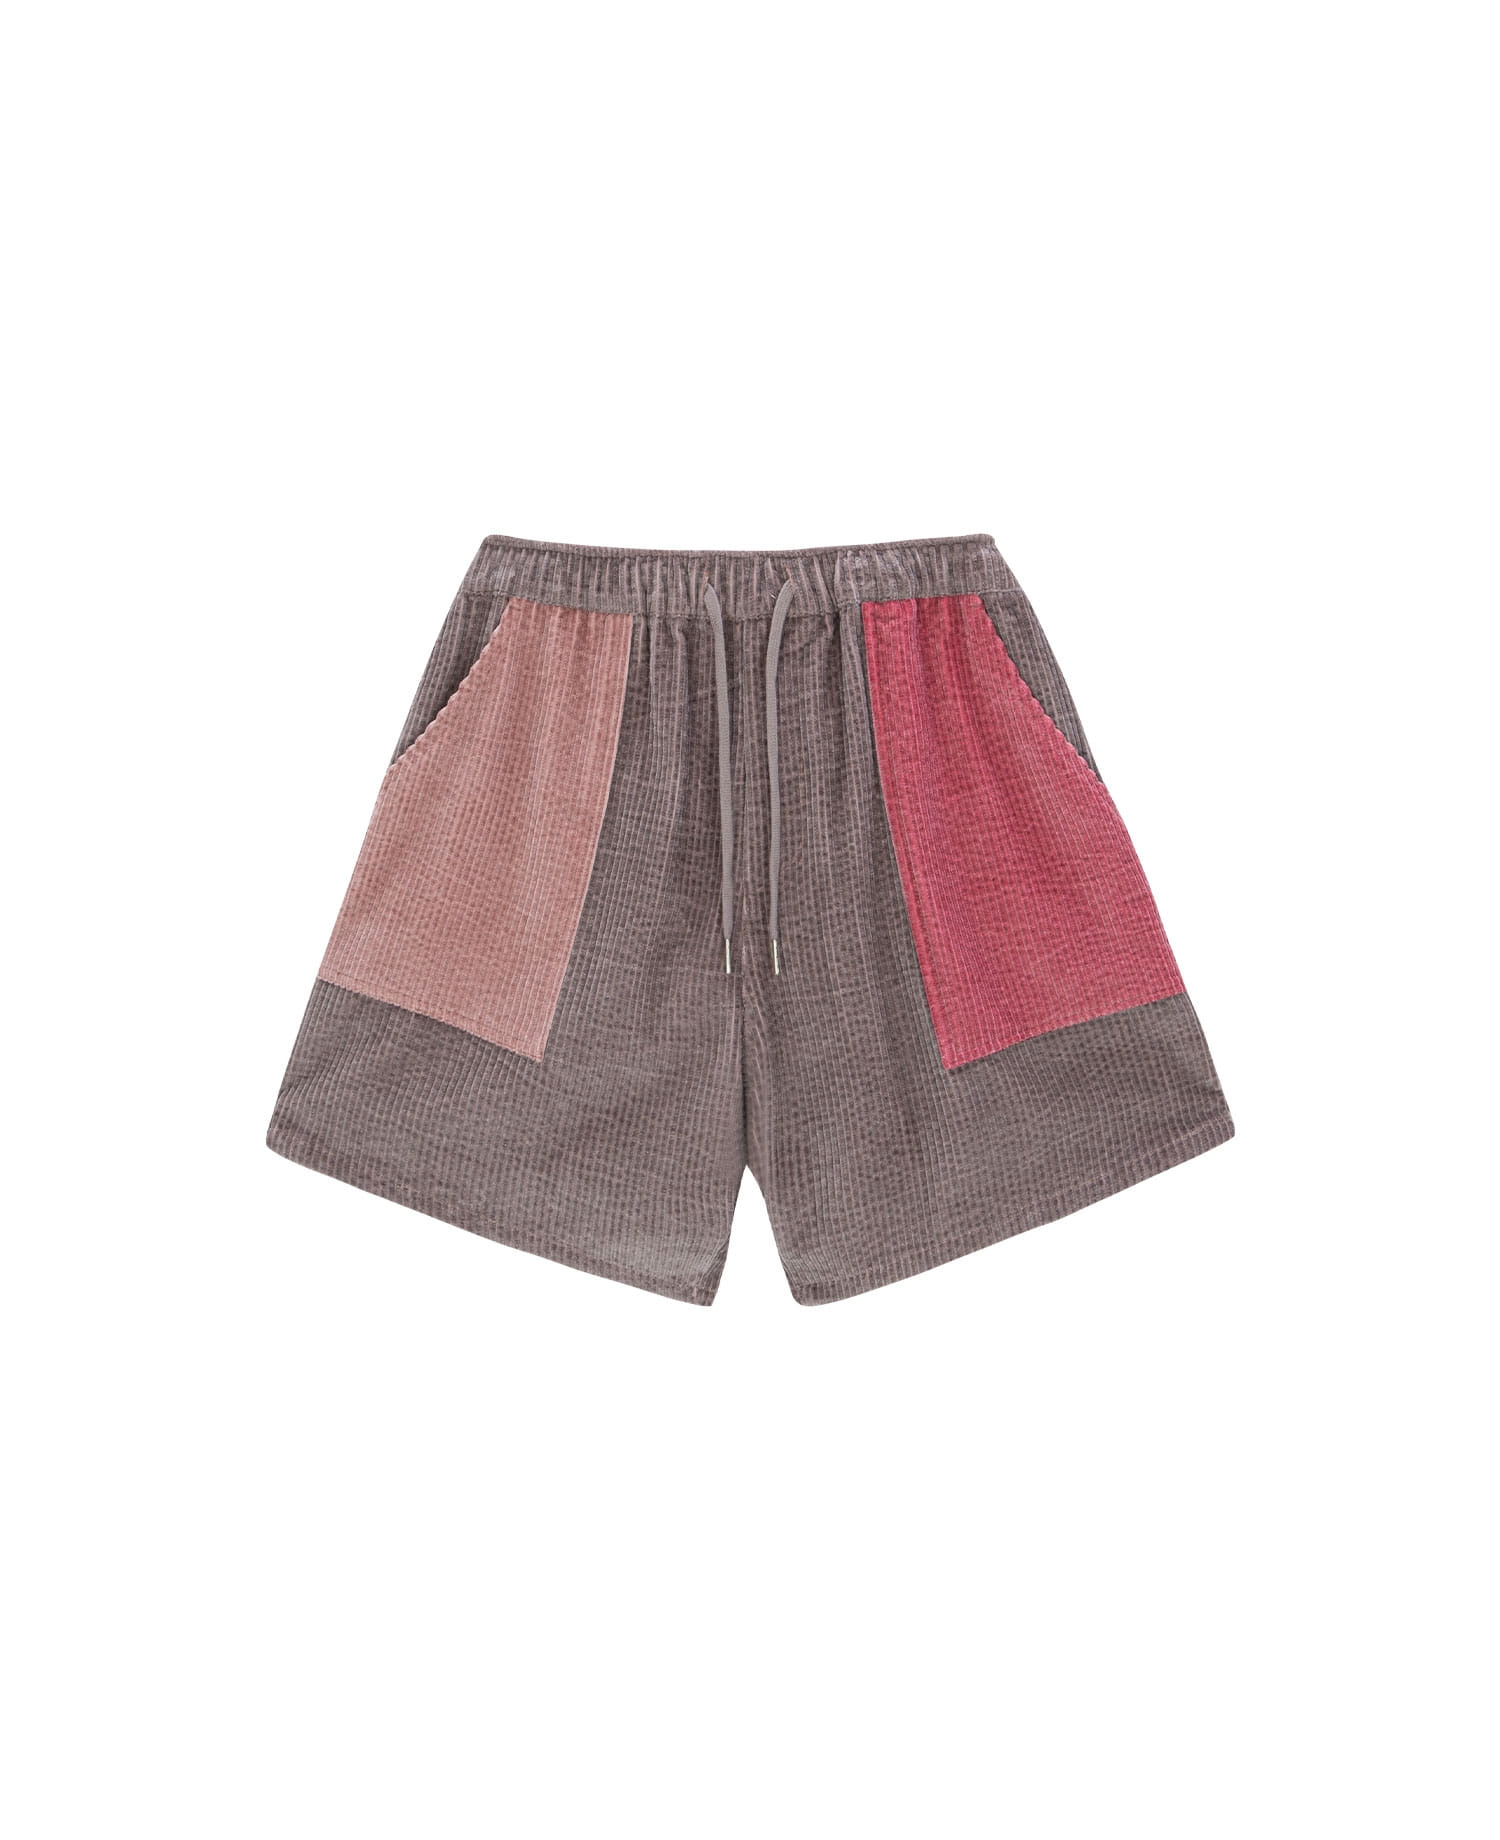 DYING CORDUROY SHORTS PINK